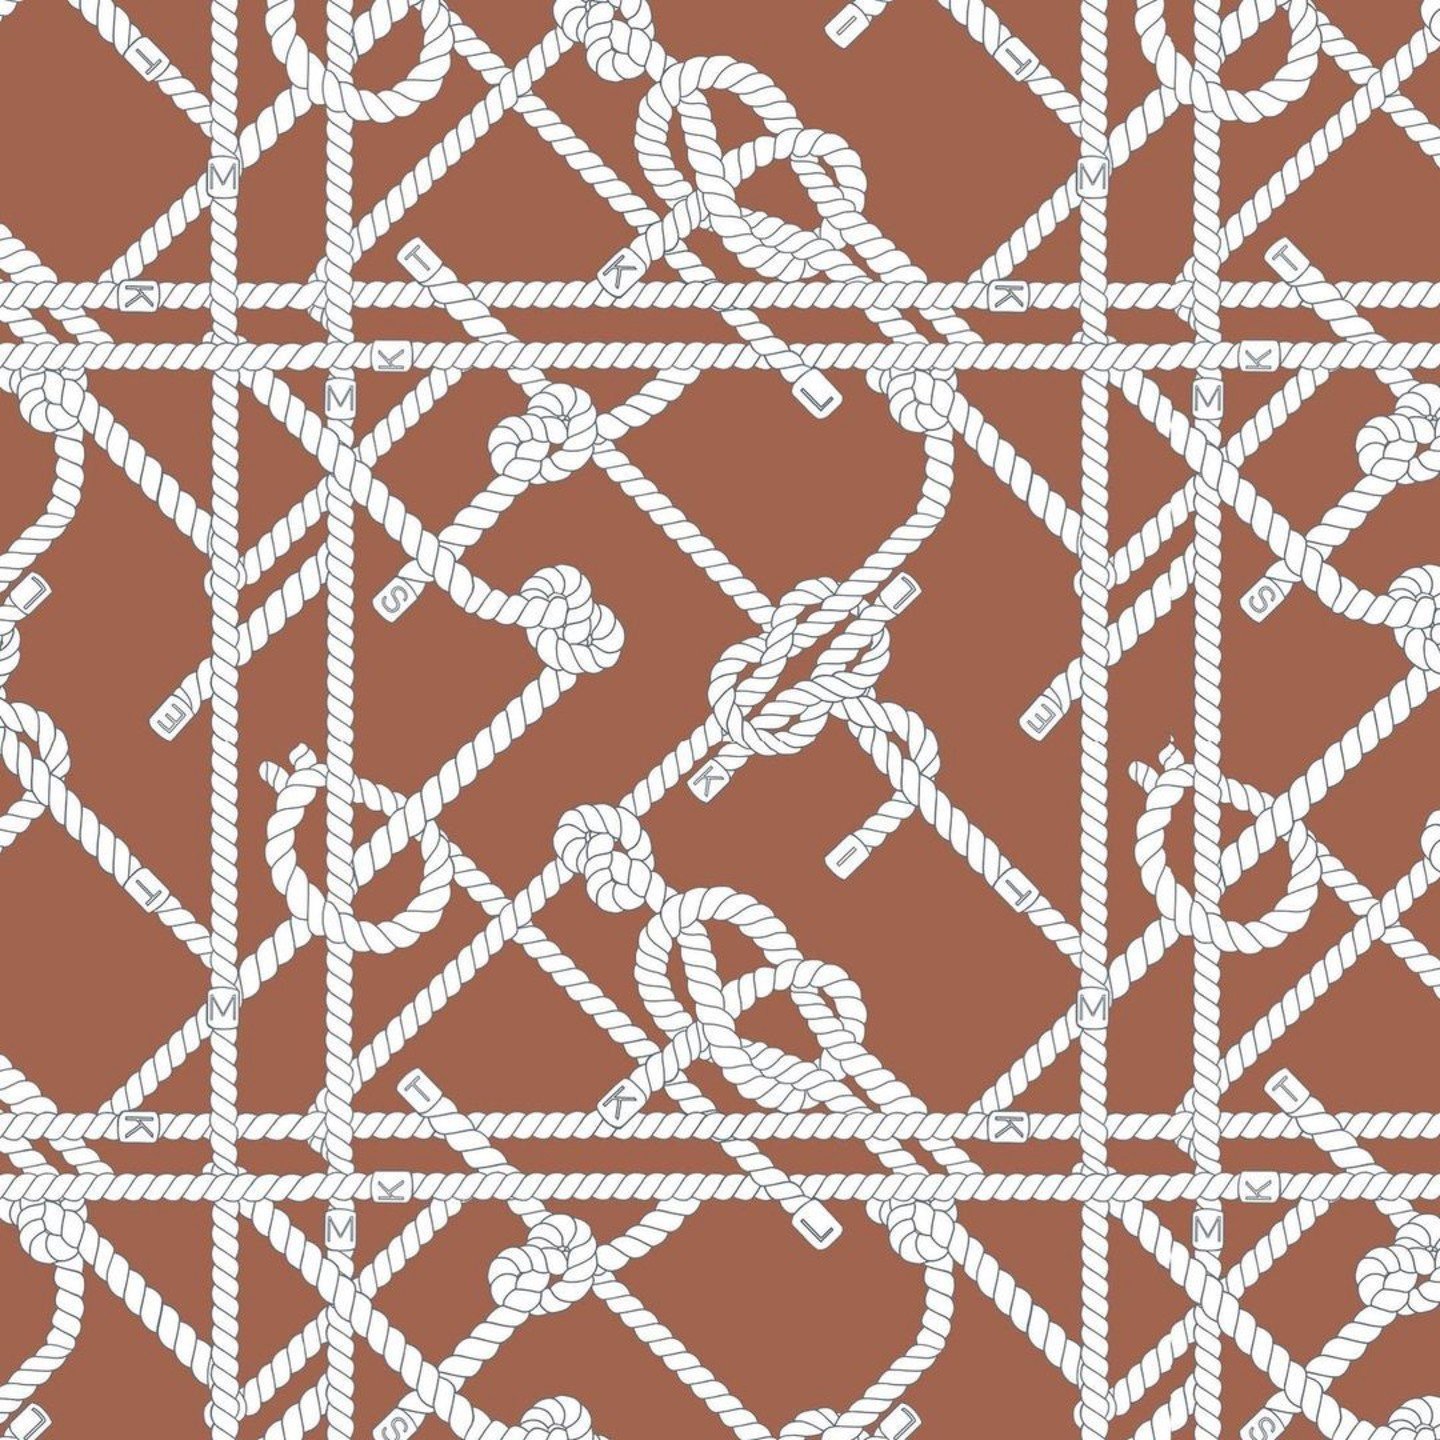 Launched at the close of Milan Design Week, the Monogram Loop Wallcovering from @kitmilesstudio has received a fresh update! Discover its new look and elevate your space with a modern twist on a classic design.

#sloanmiyasato #kitmiles #wallcovering